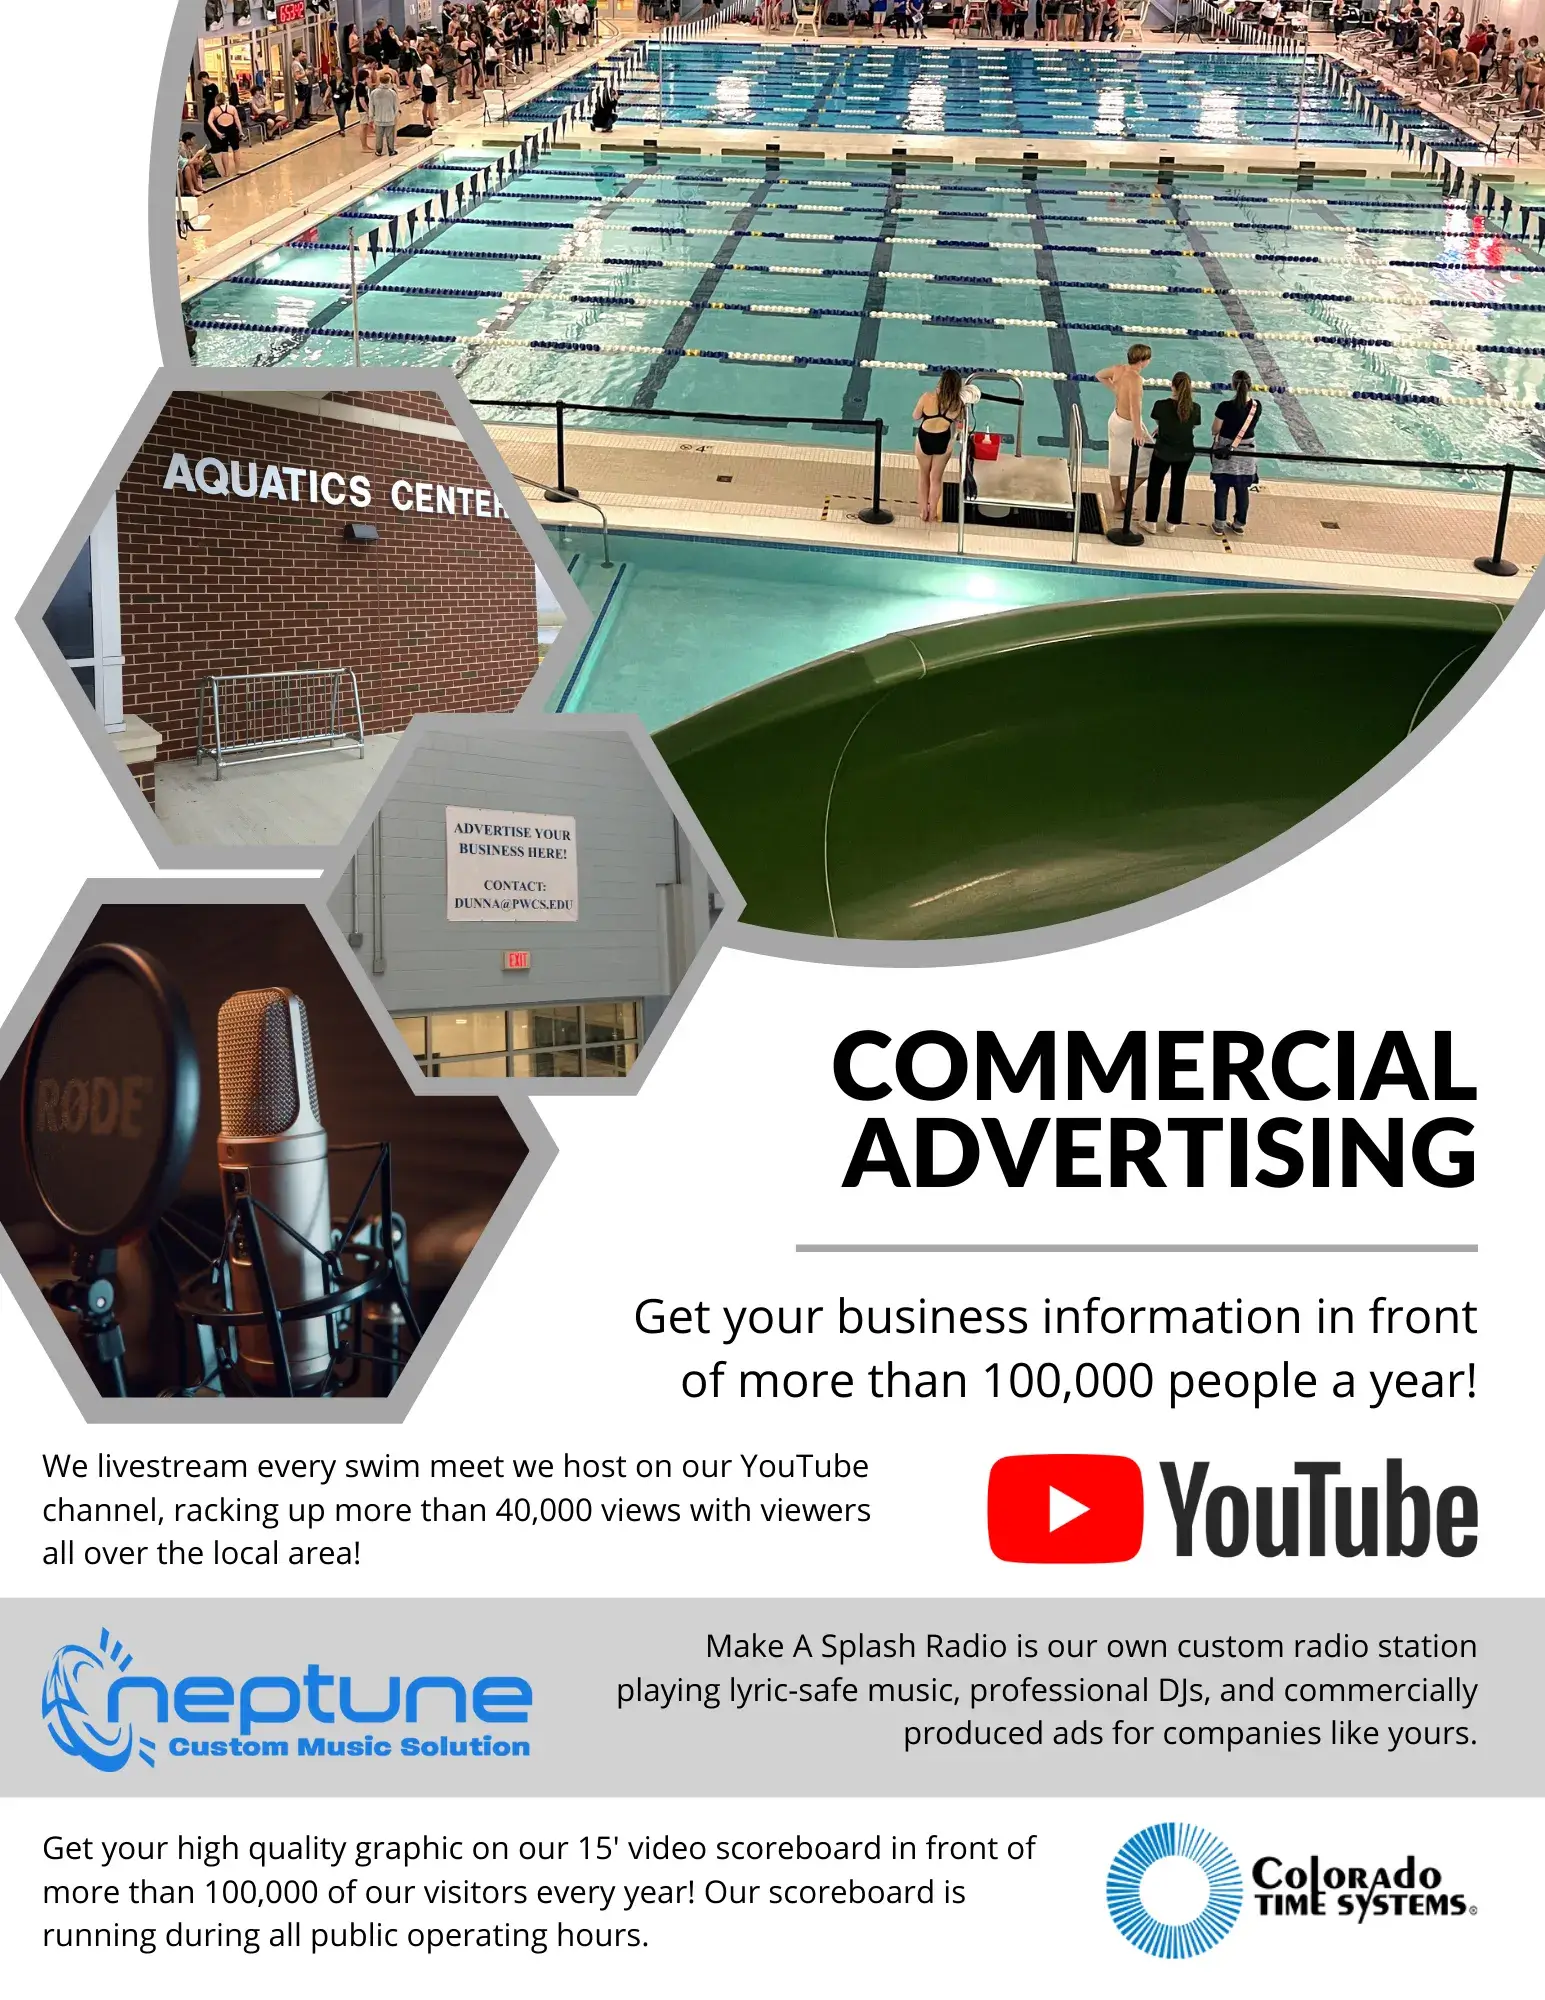 Flyer with photos of the Aquatics Center and a description of the different advertising opportunities available at the facility. Hyperlink to advertising interest form.